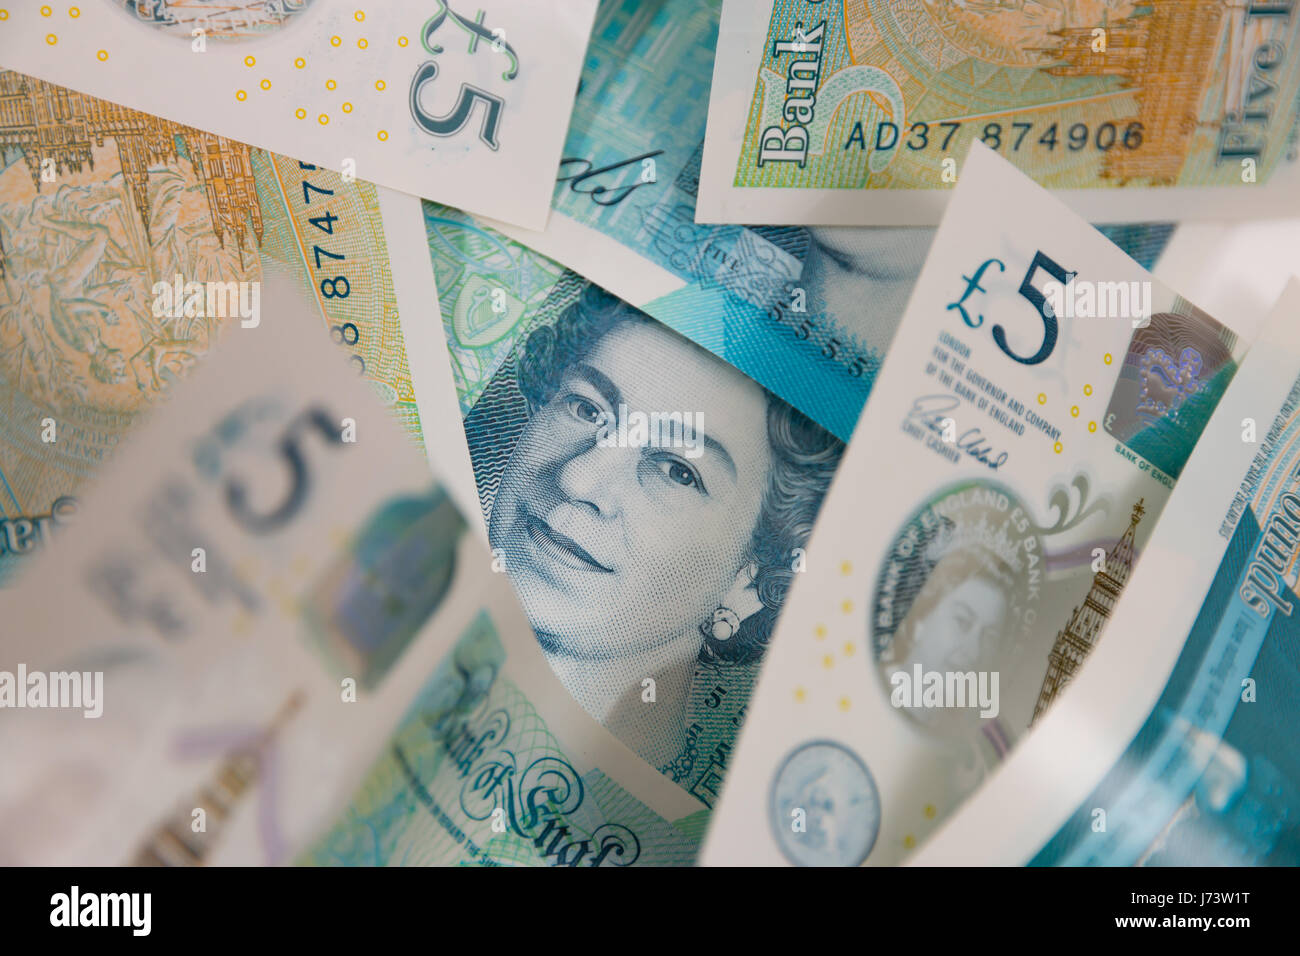 The face of Queen Elizabeth II staring out from a pile of five pound notes Stock Photo